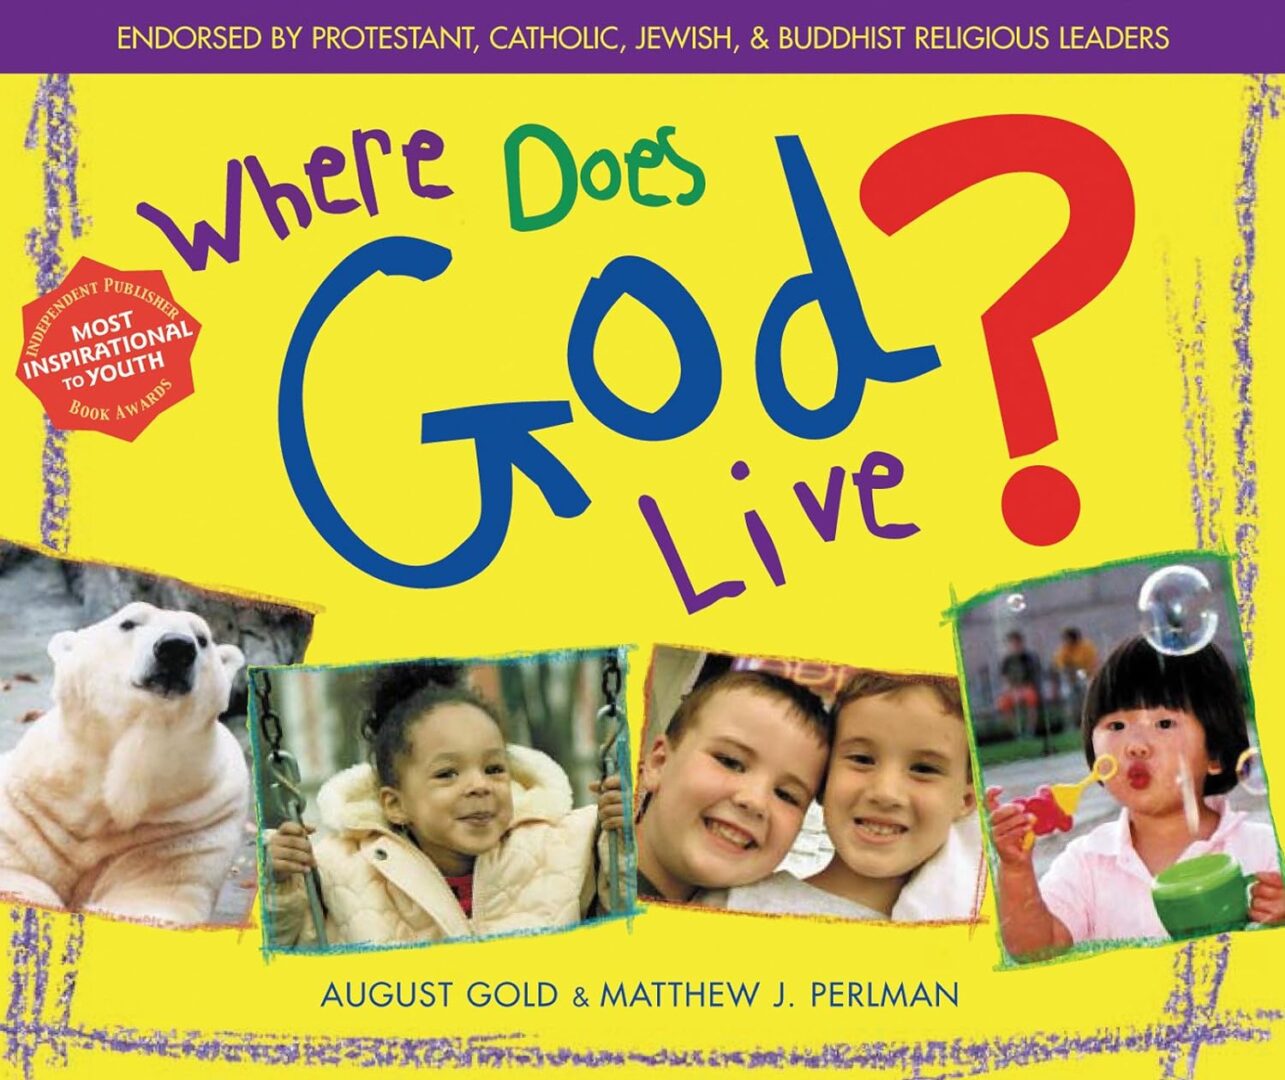 A book cover with pictures of children and the words " where does god live ?"